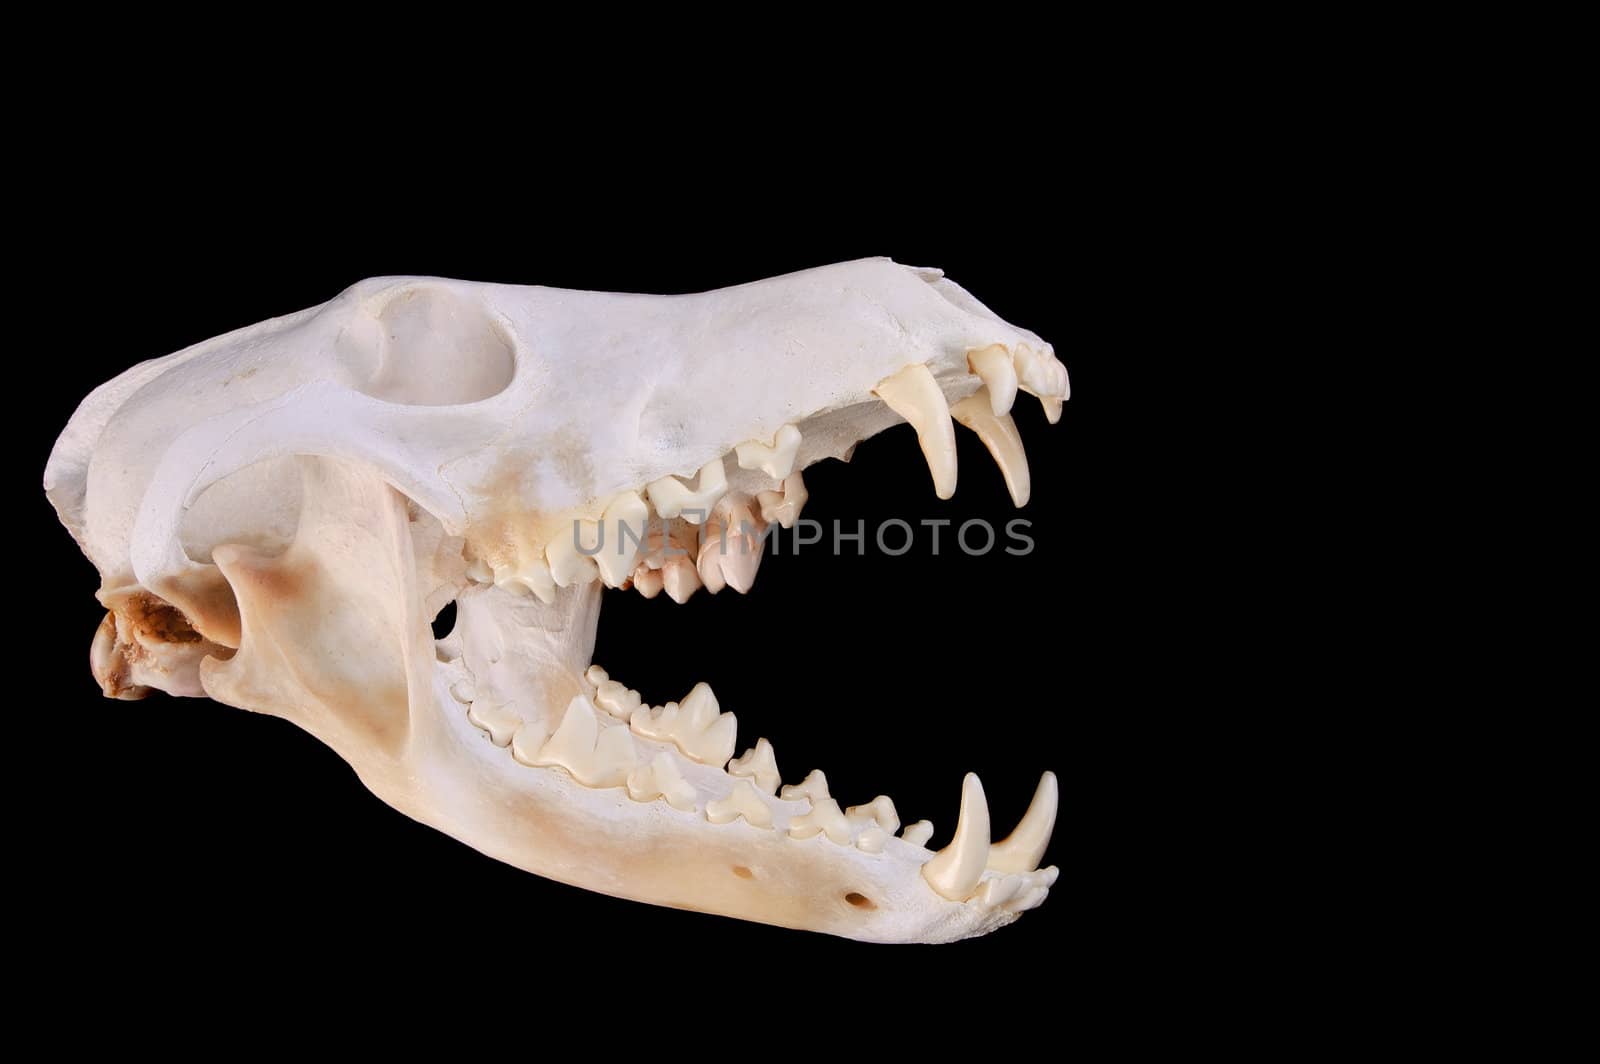 Skull of a coyote (canis Latrans) on a black background with jaw open